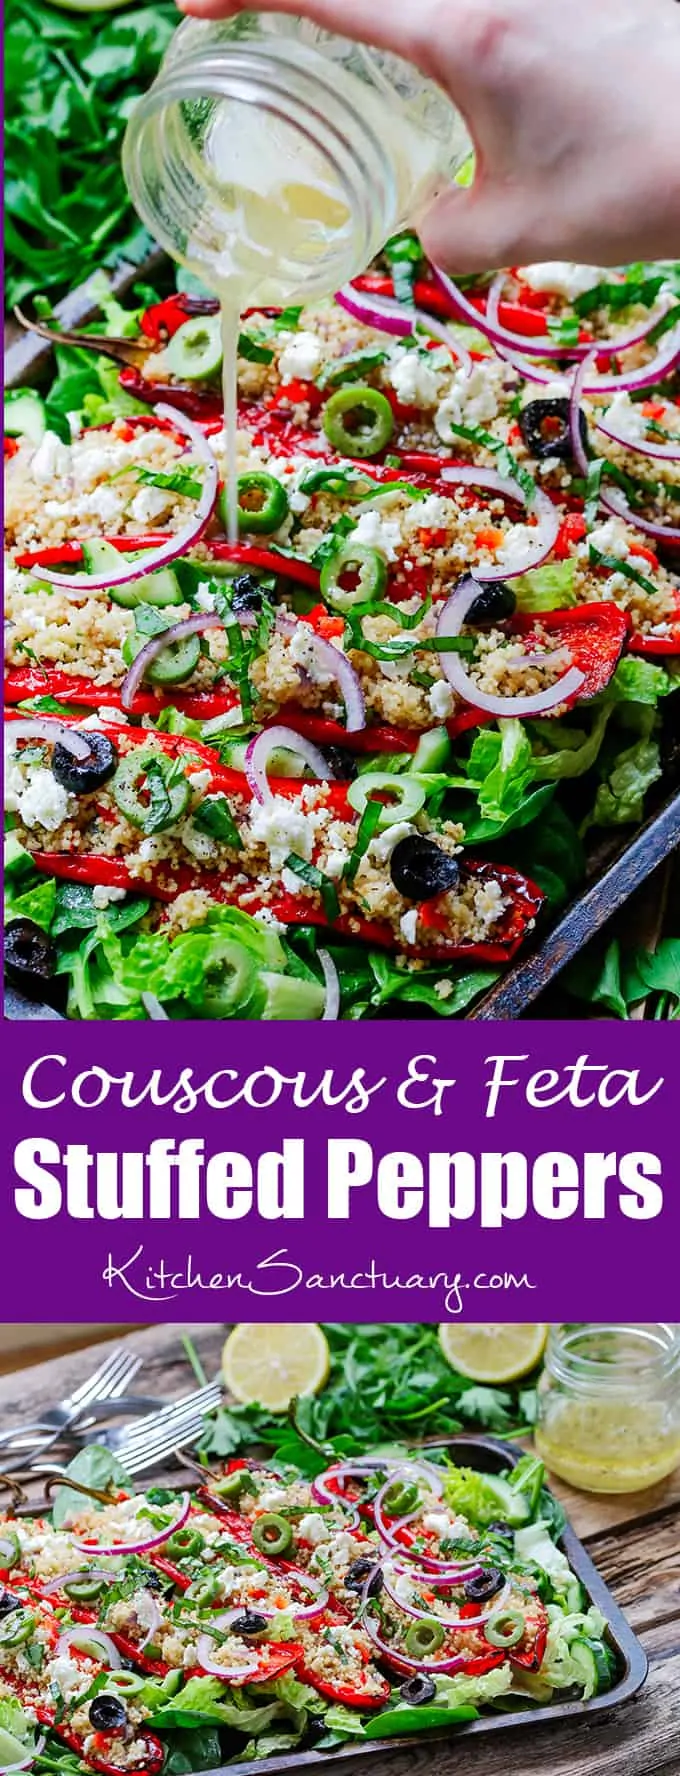 Couscous and Feta Stuffed Peppers - Serve them as a light lunch or side dish. Also great for serving at your BBQ party!